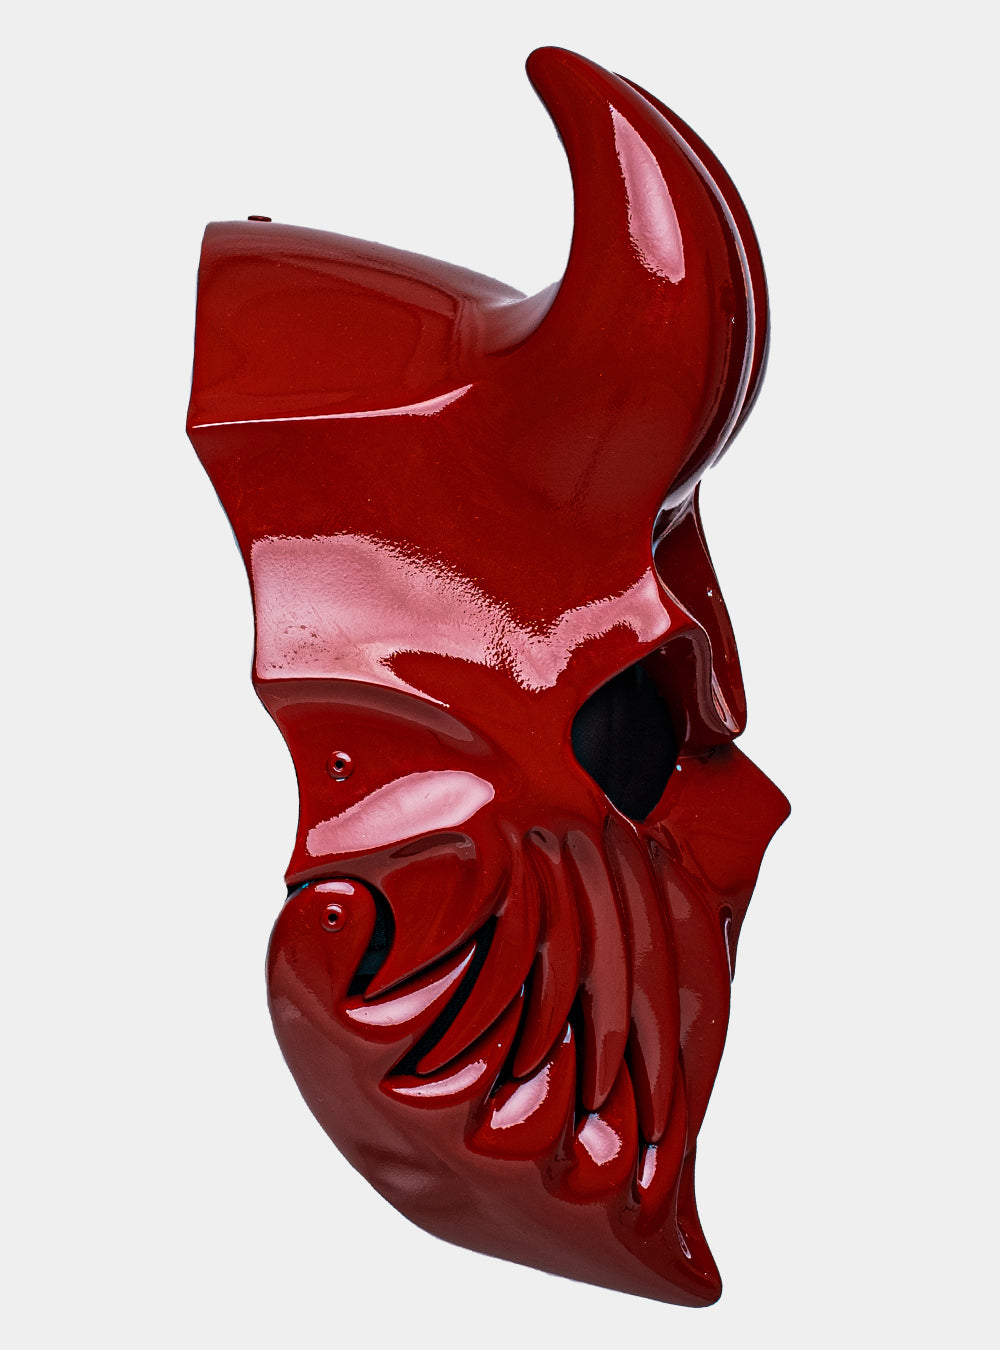 (SLAUGHTER TO PREVAIL) ALEX TERRIBLE MASK “KID OF DARKNESS” (RED)